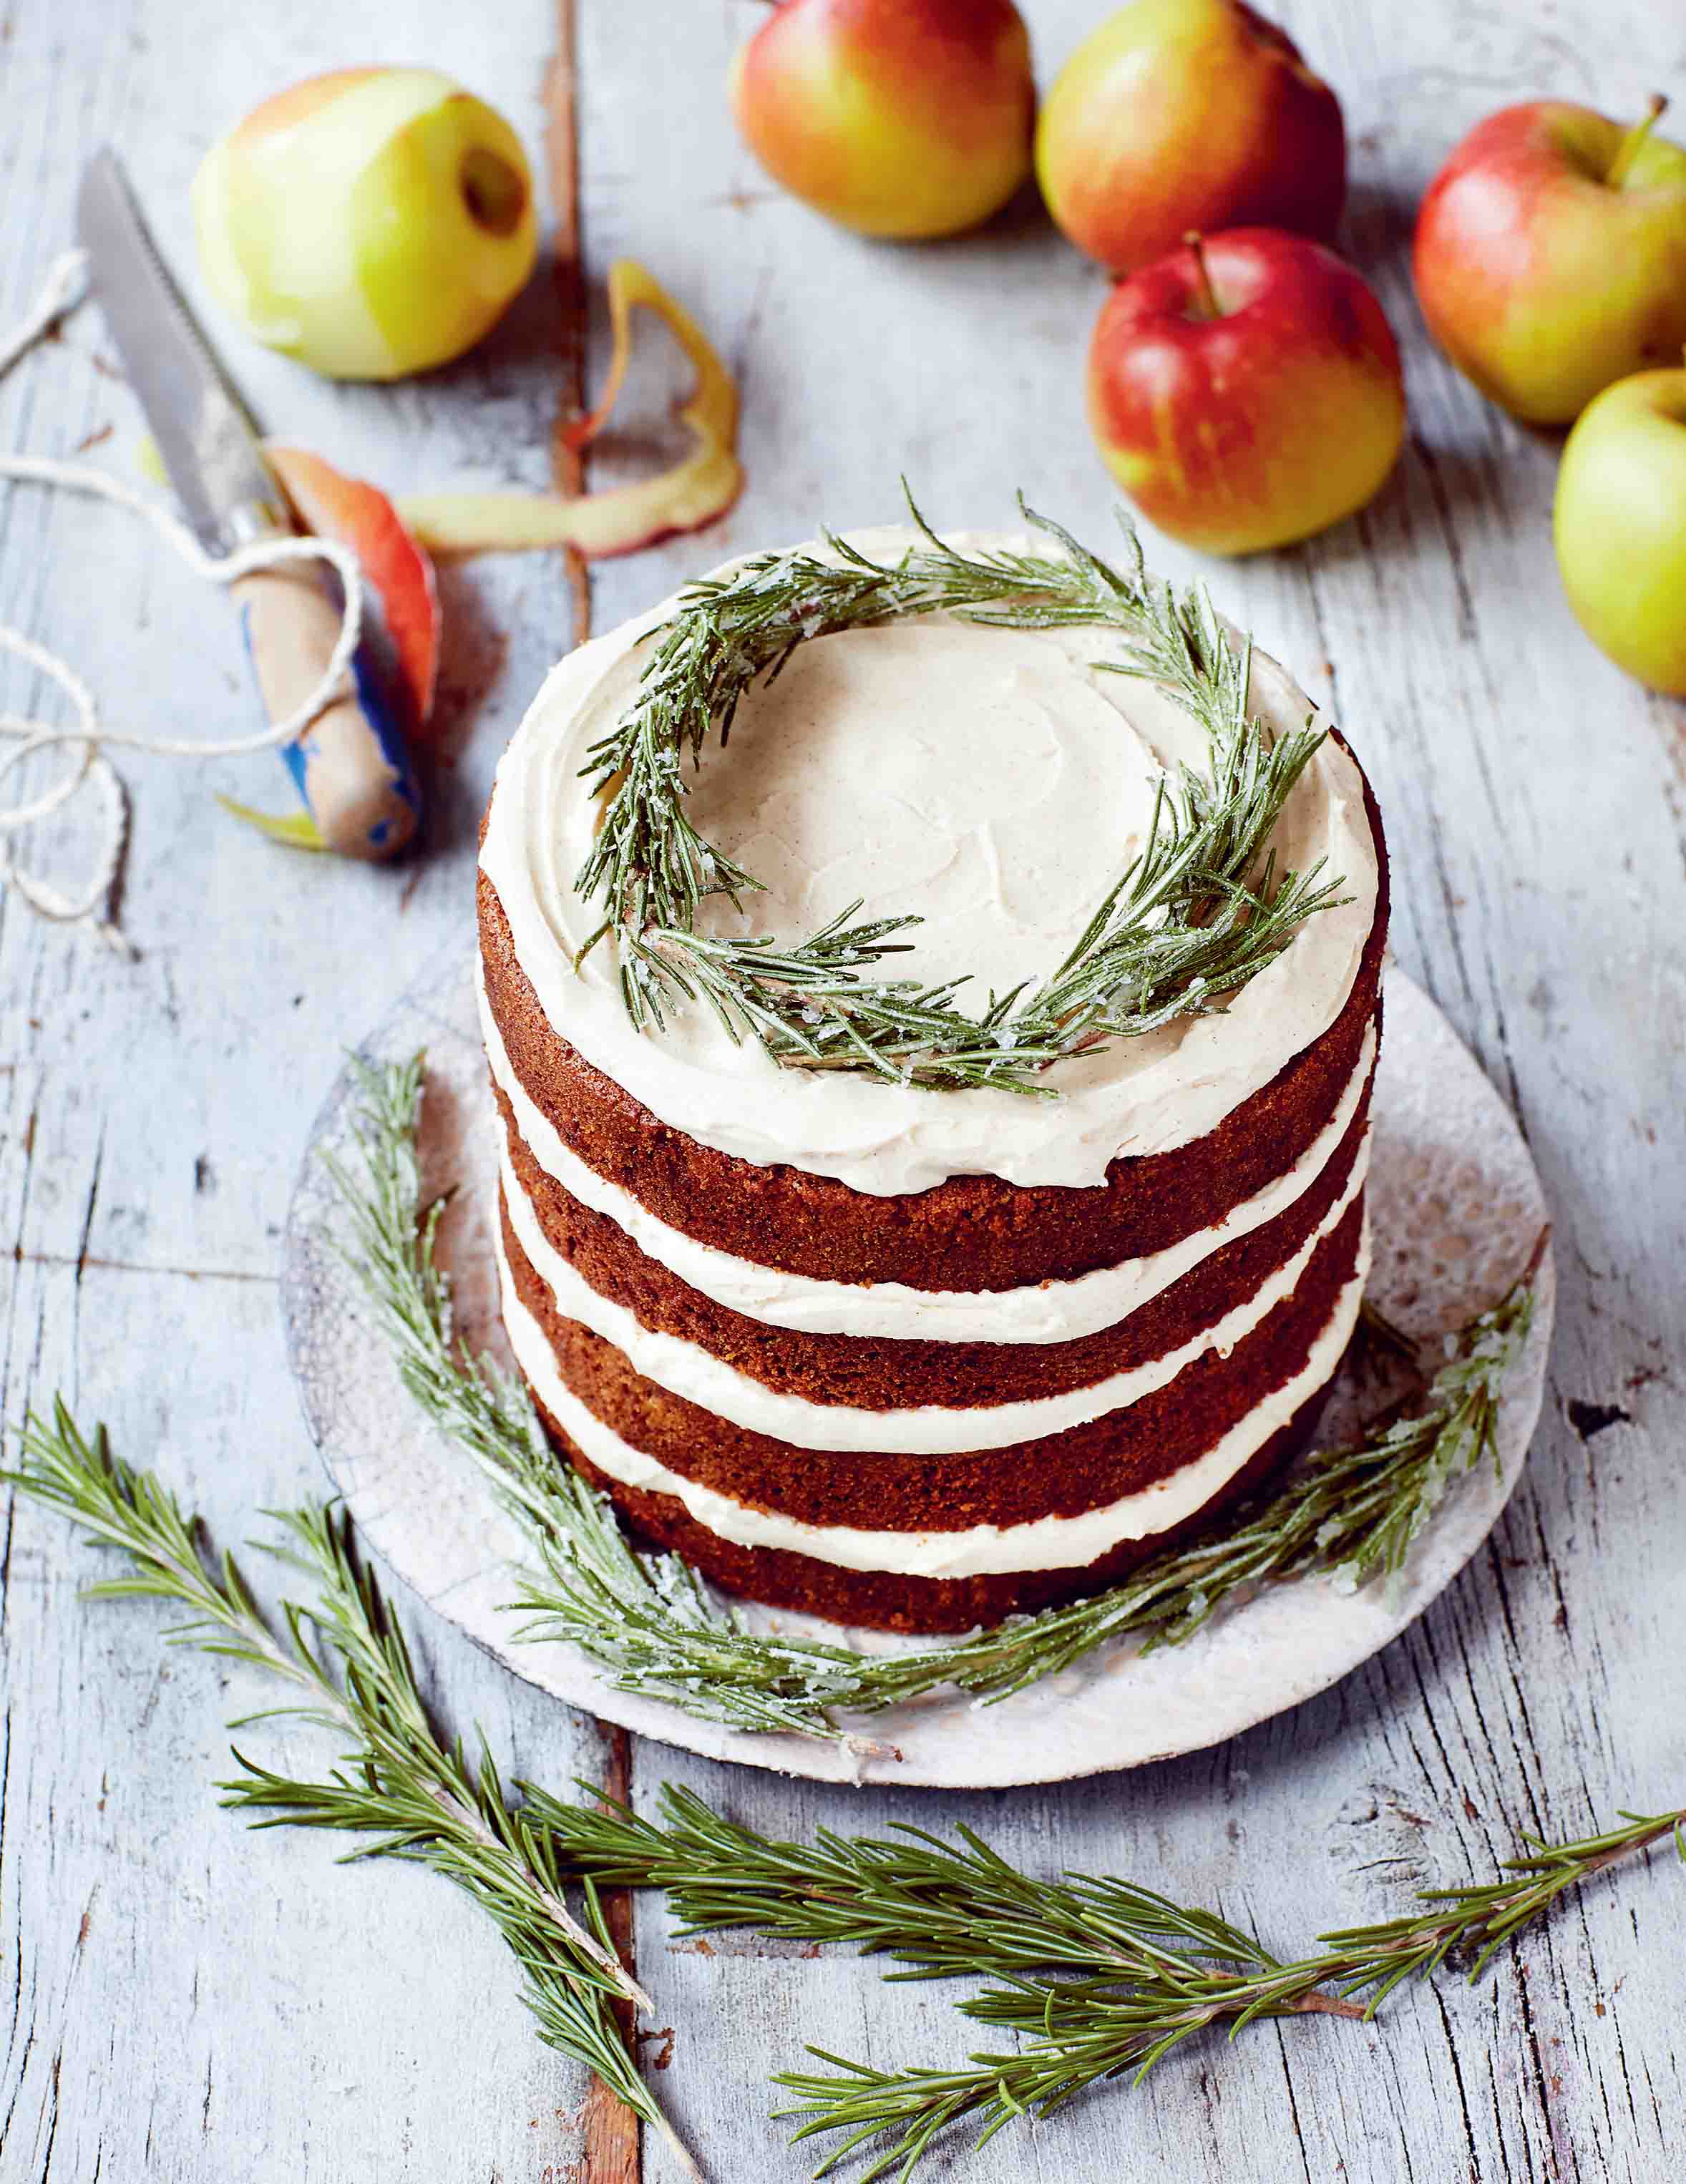 Apple, parsnip and rosemary syrup cake